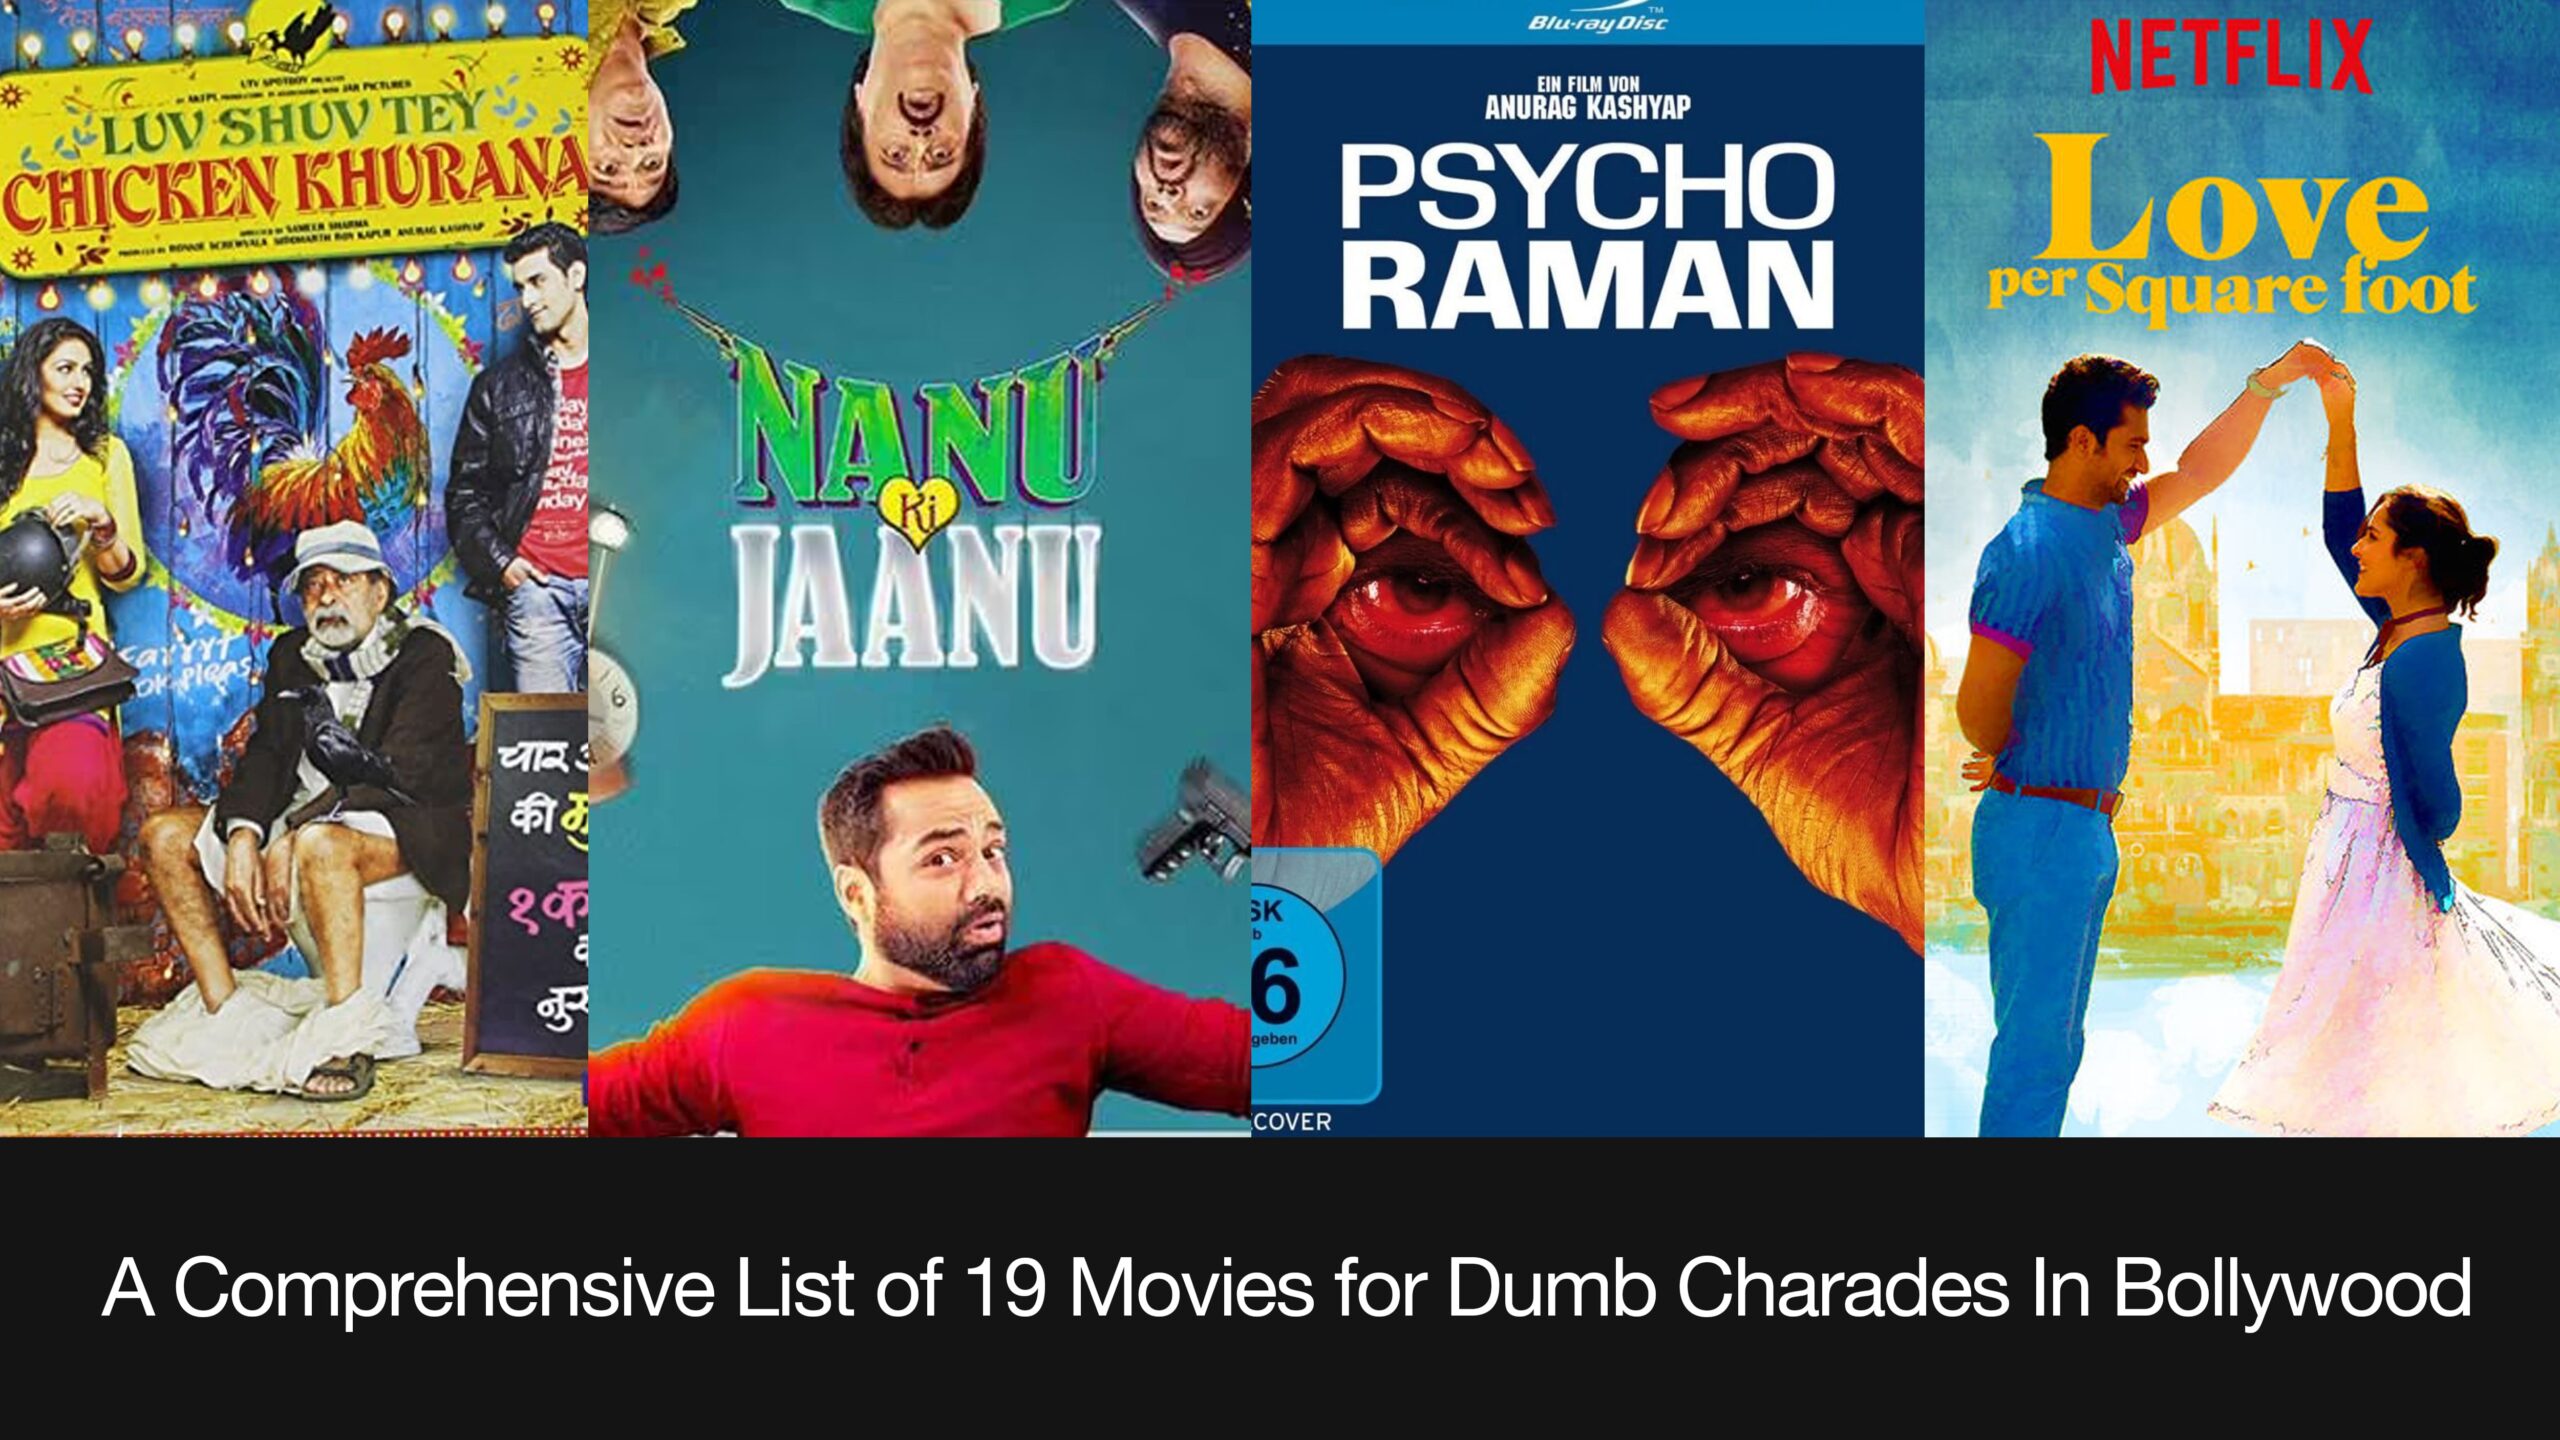 List Of 19 Hindi Movies For Dumb Charades In Bollywood - Bewakoof